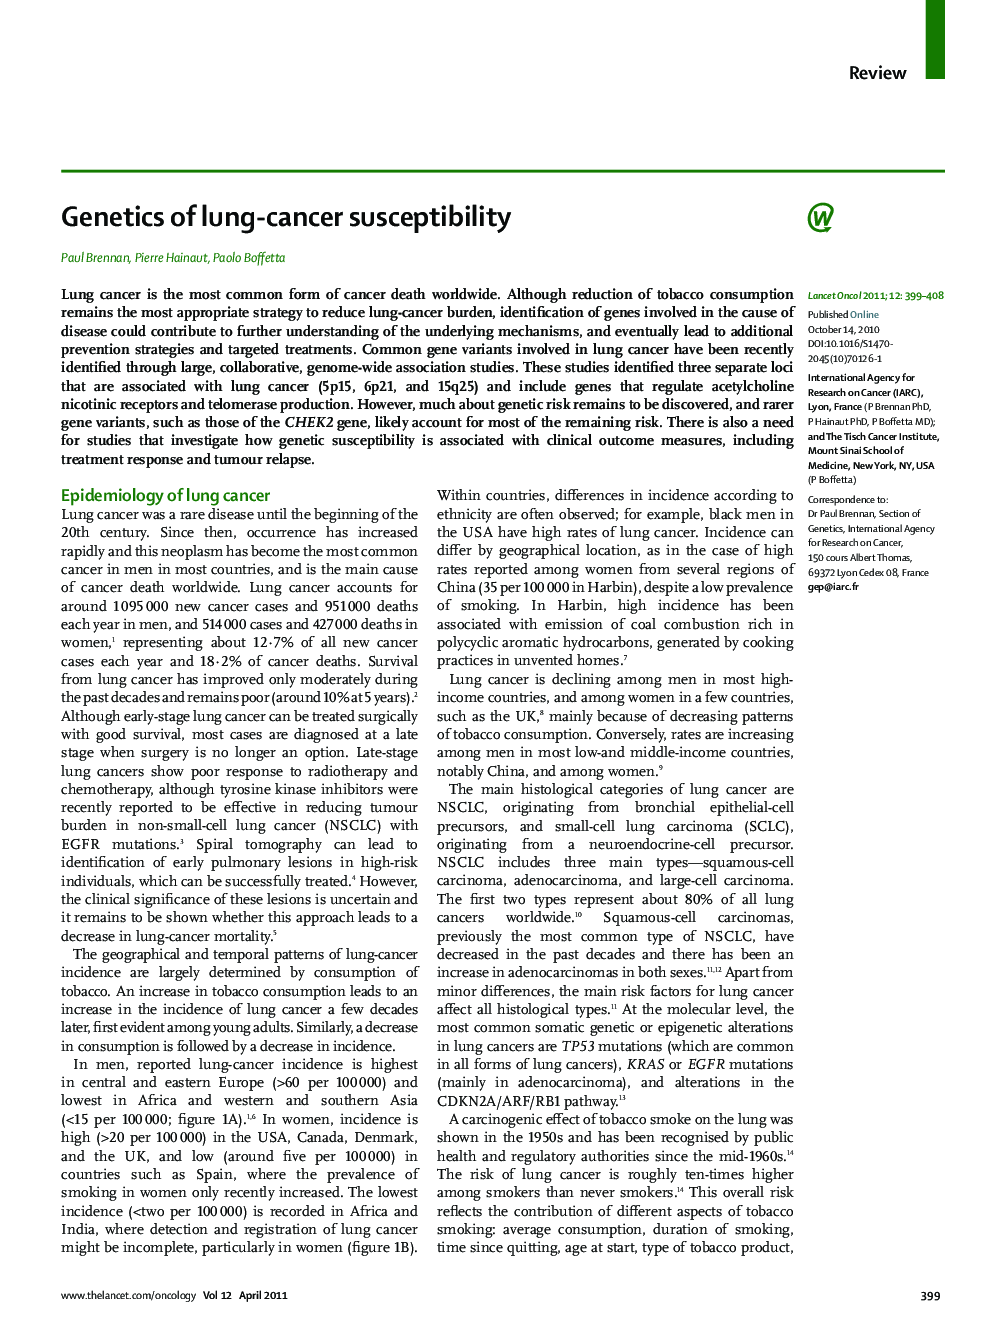 Genetics of lung-cancer susceptibility